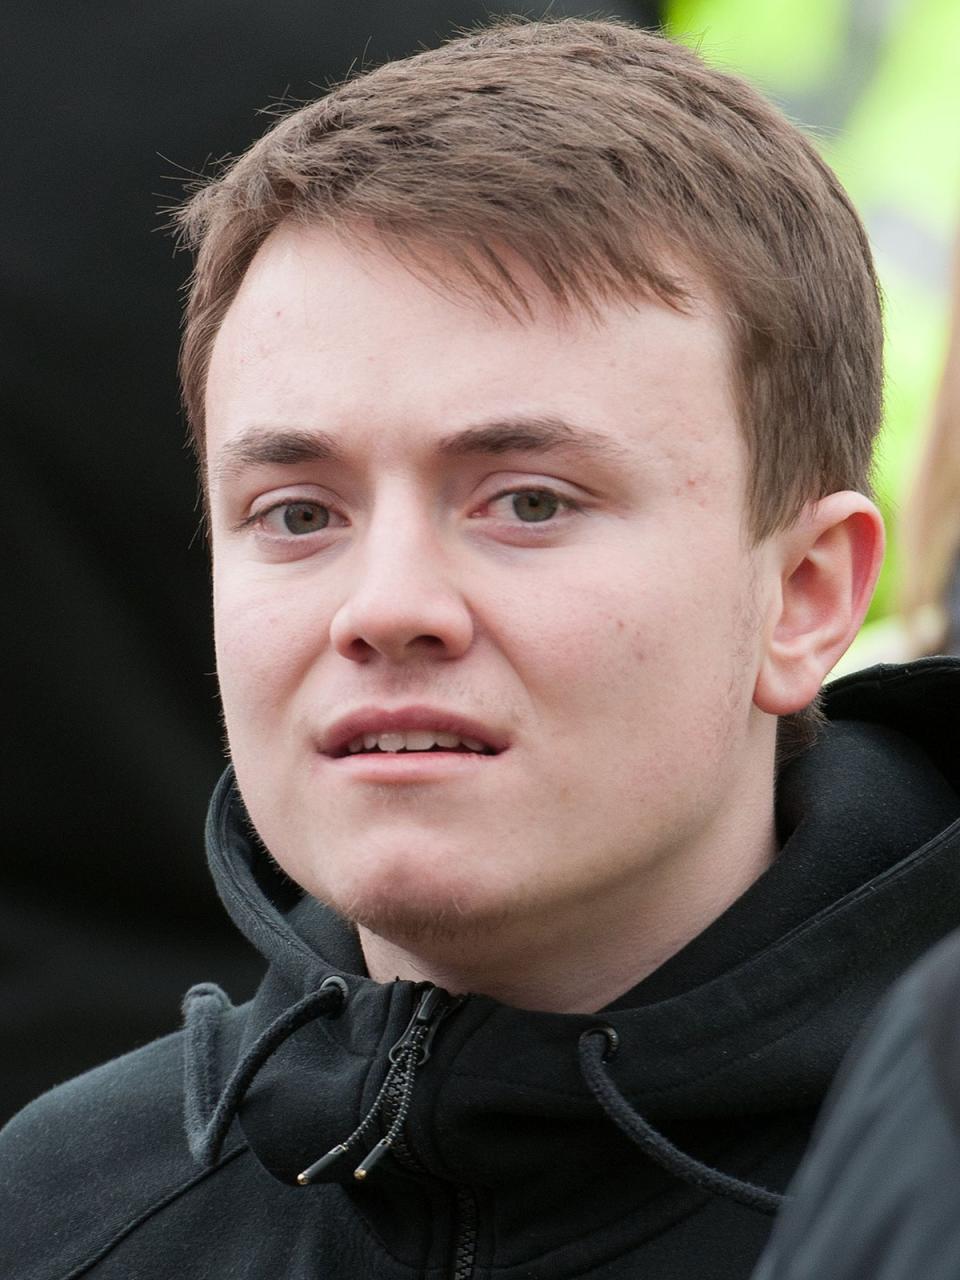 Jack Renshaw admitted plotting to kill his local Labour MP with a machete (Hope Not Hate)